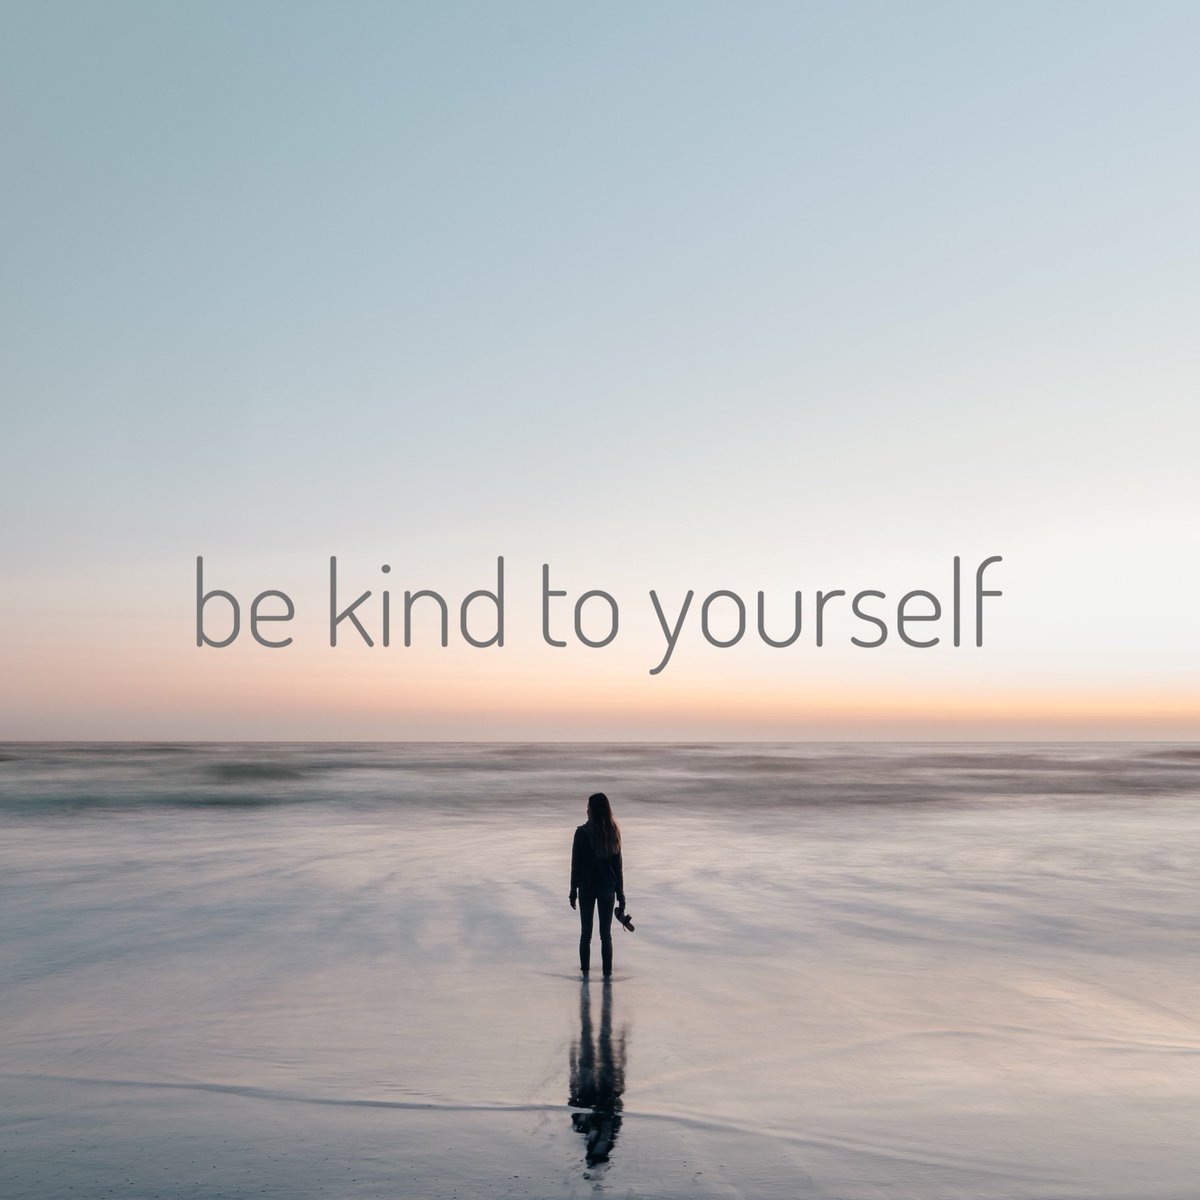 BE KIND TO YOURSELF
.
Slowing down
Reconnecting
Nourishing important relationships 
Nourishing your body with good food
.
These are acts of self-love and kindness. What kindness can you do for yourself today?
.
#selflove #selfcare #mentalhealth #wellbeing #healthymum #kindness